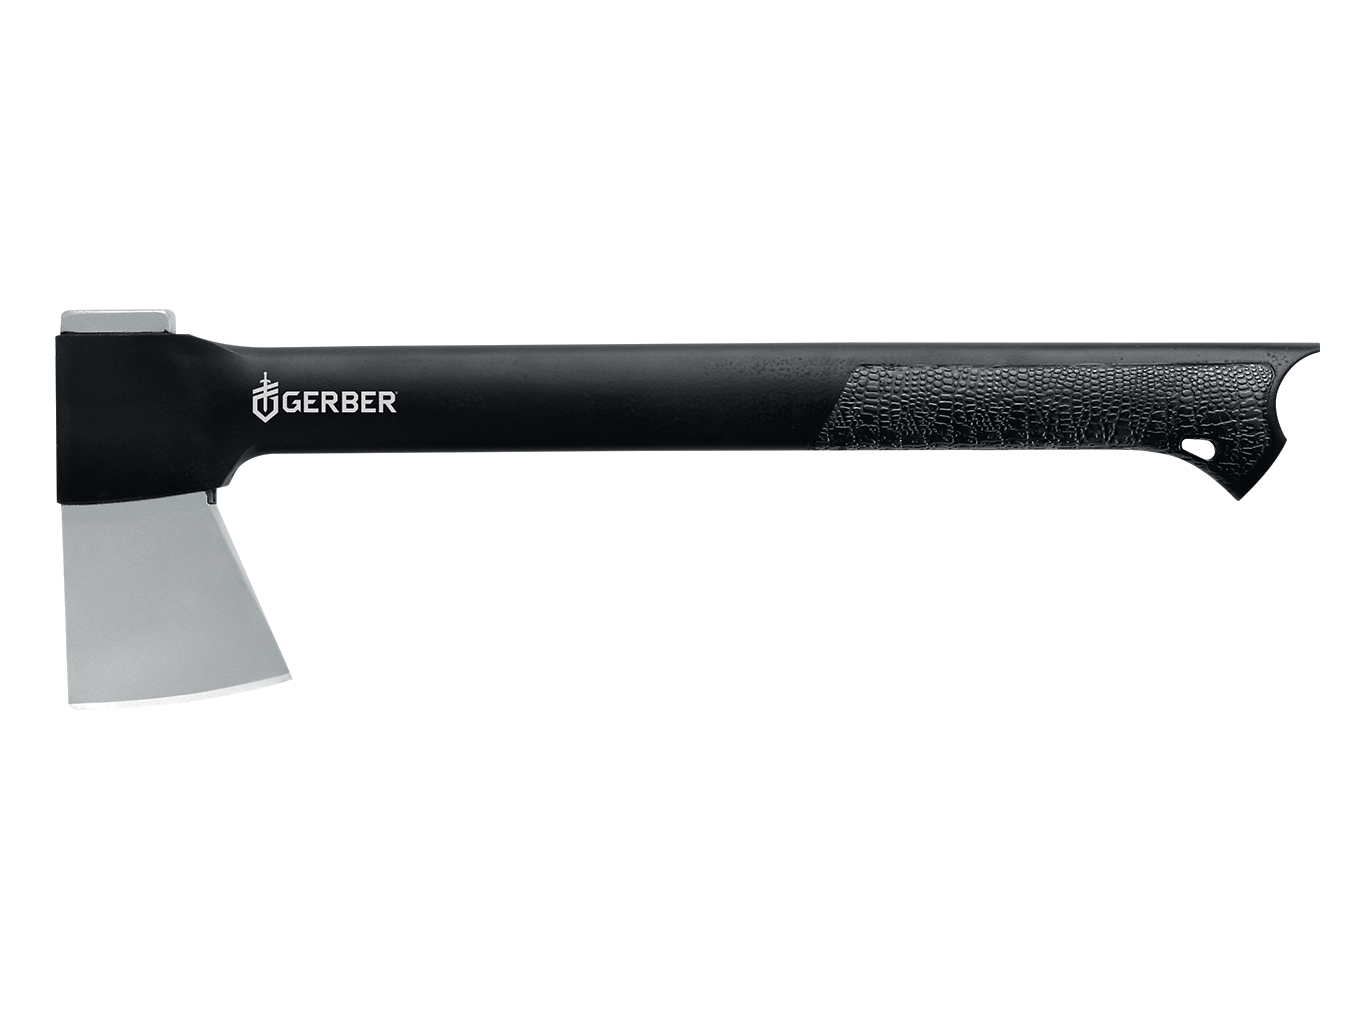 Gerber Gator Axe Combo w/ Saw | $2.01 Off Star Rating w/ Shipping and Handling